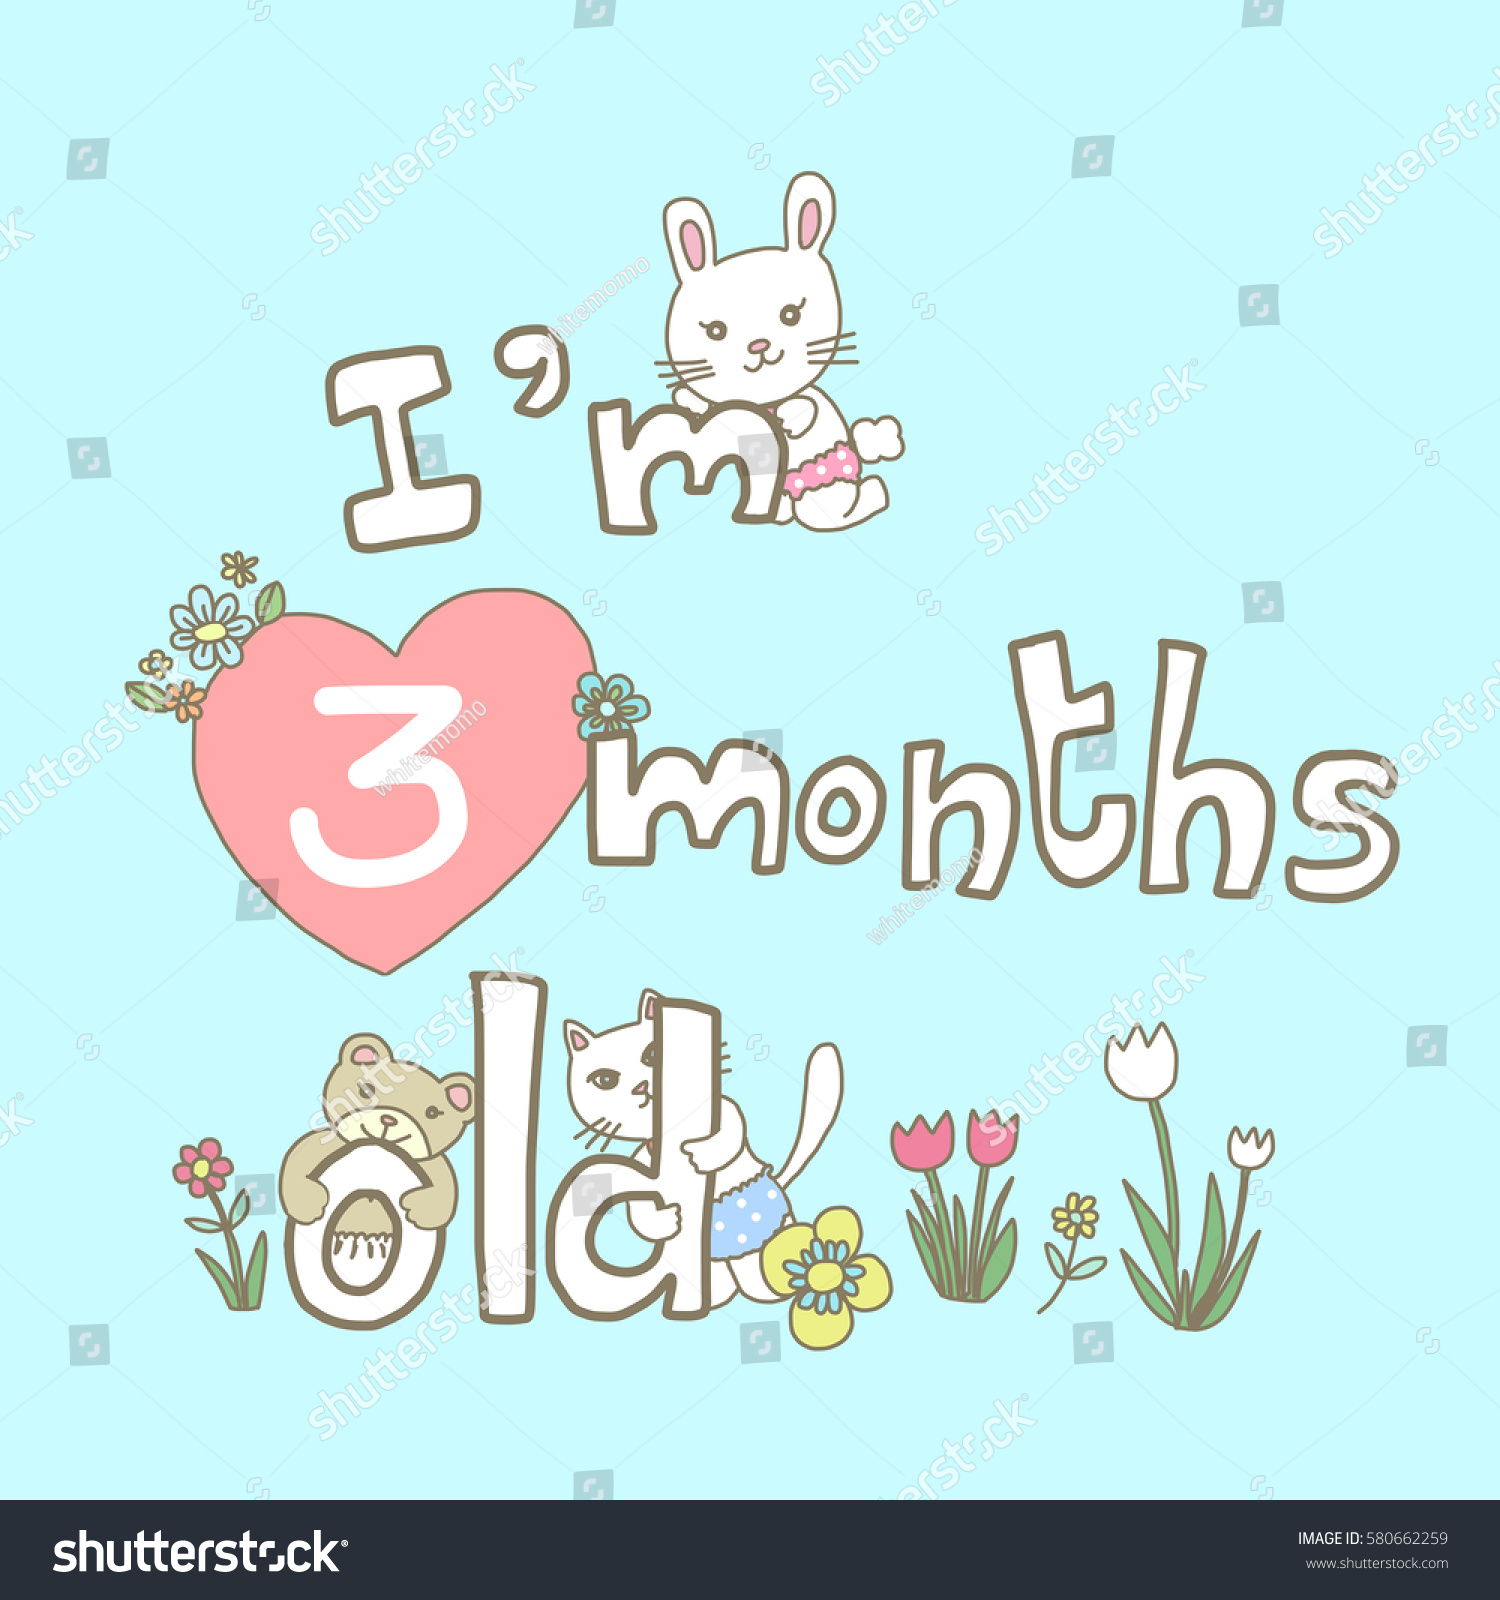 3 Months Old Clipart.